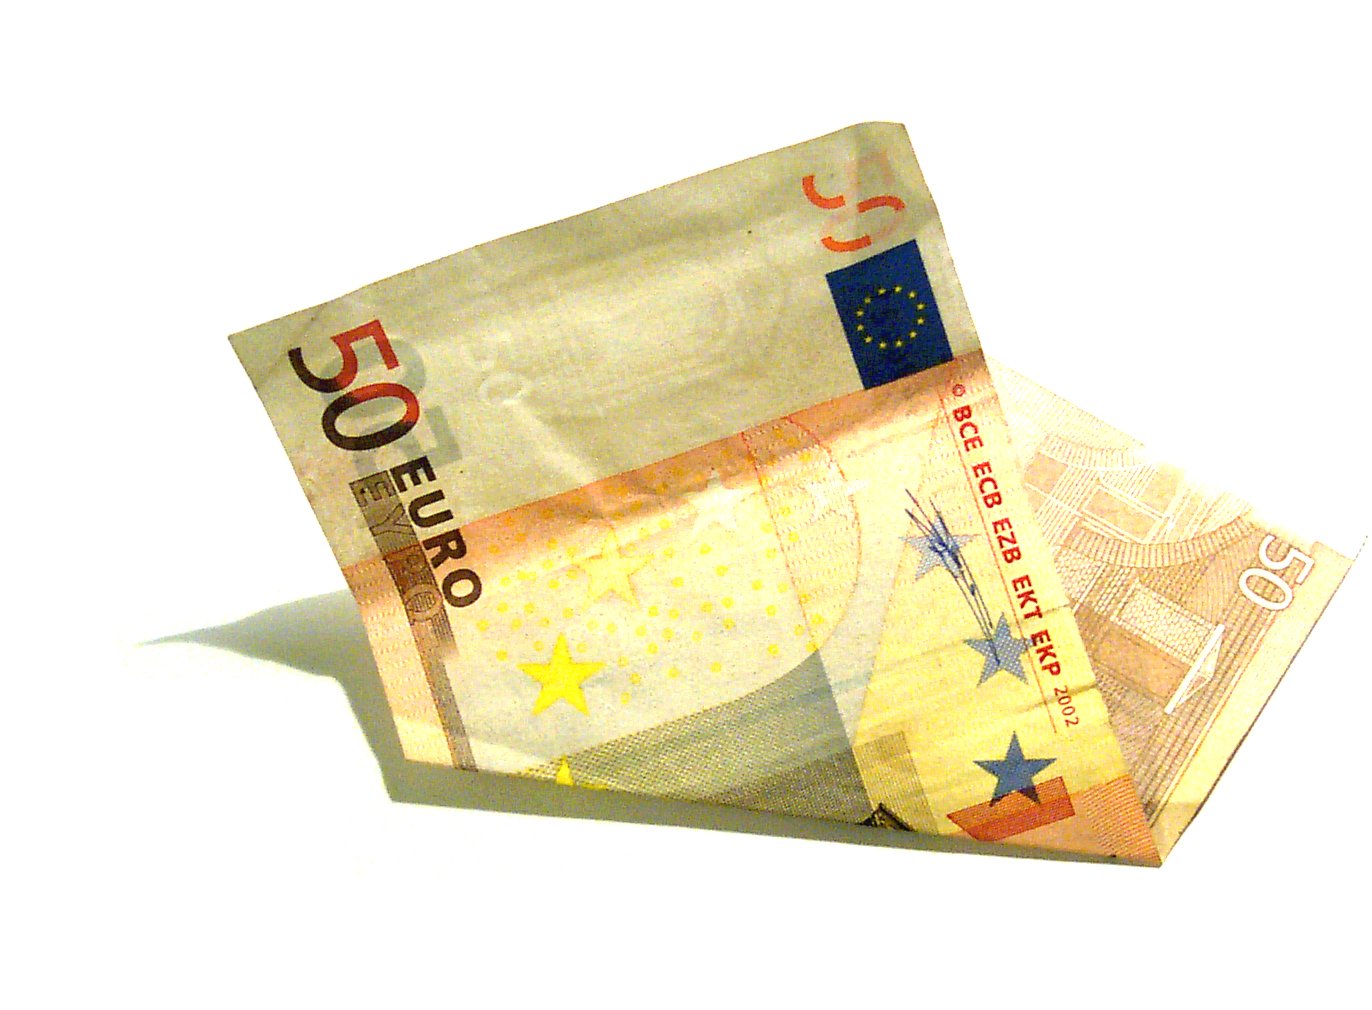 two euros bill against a white background